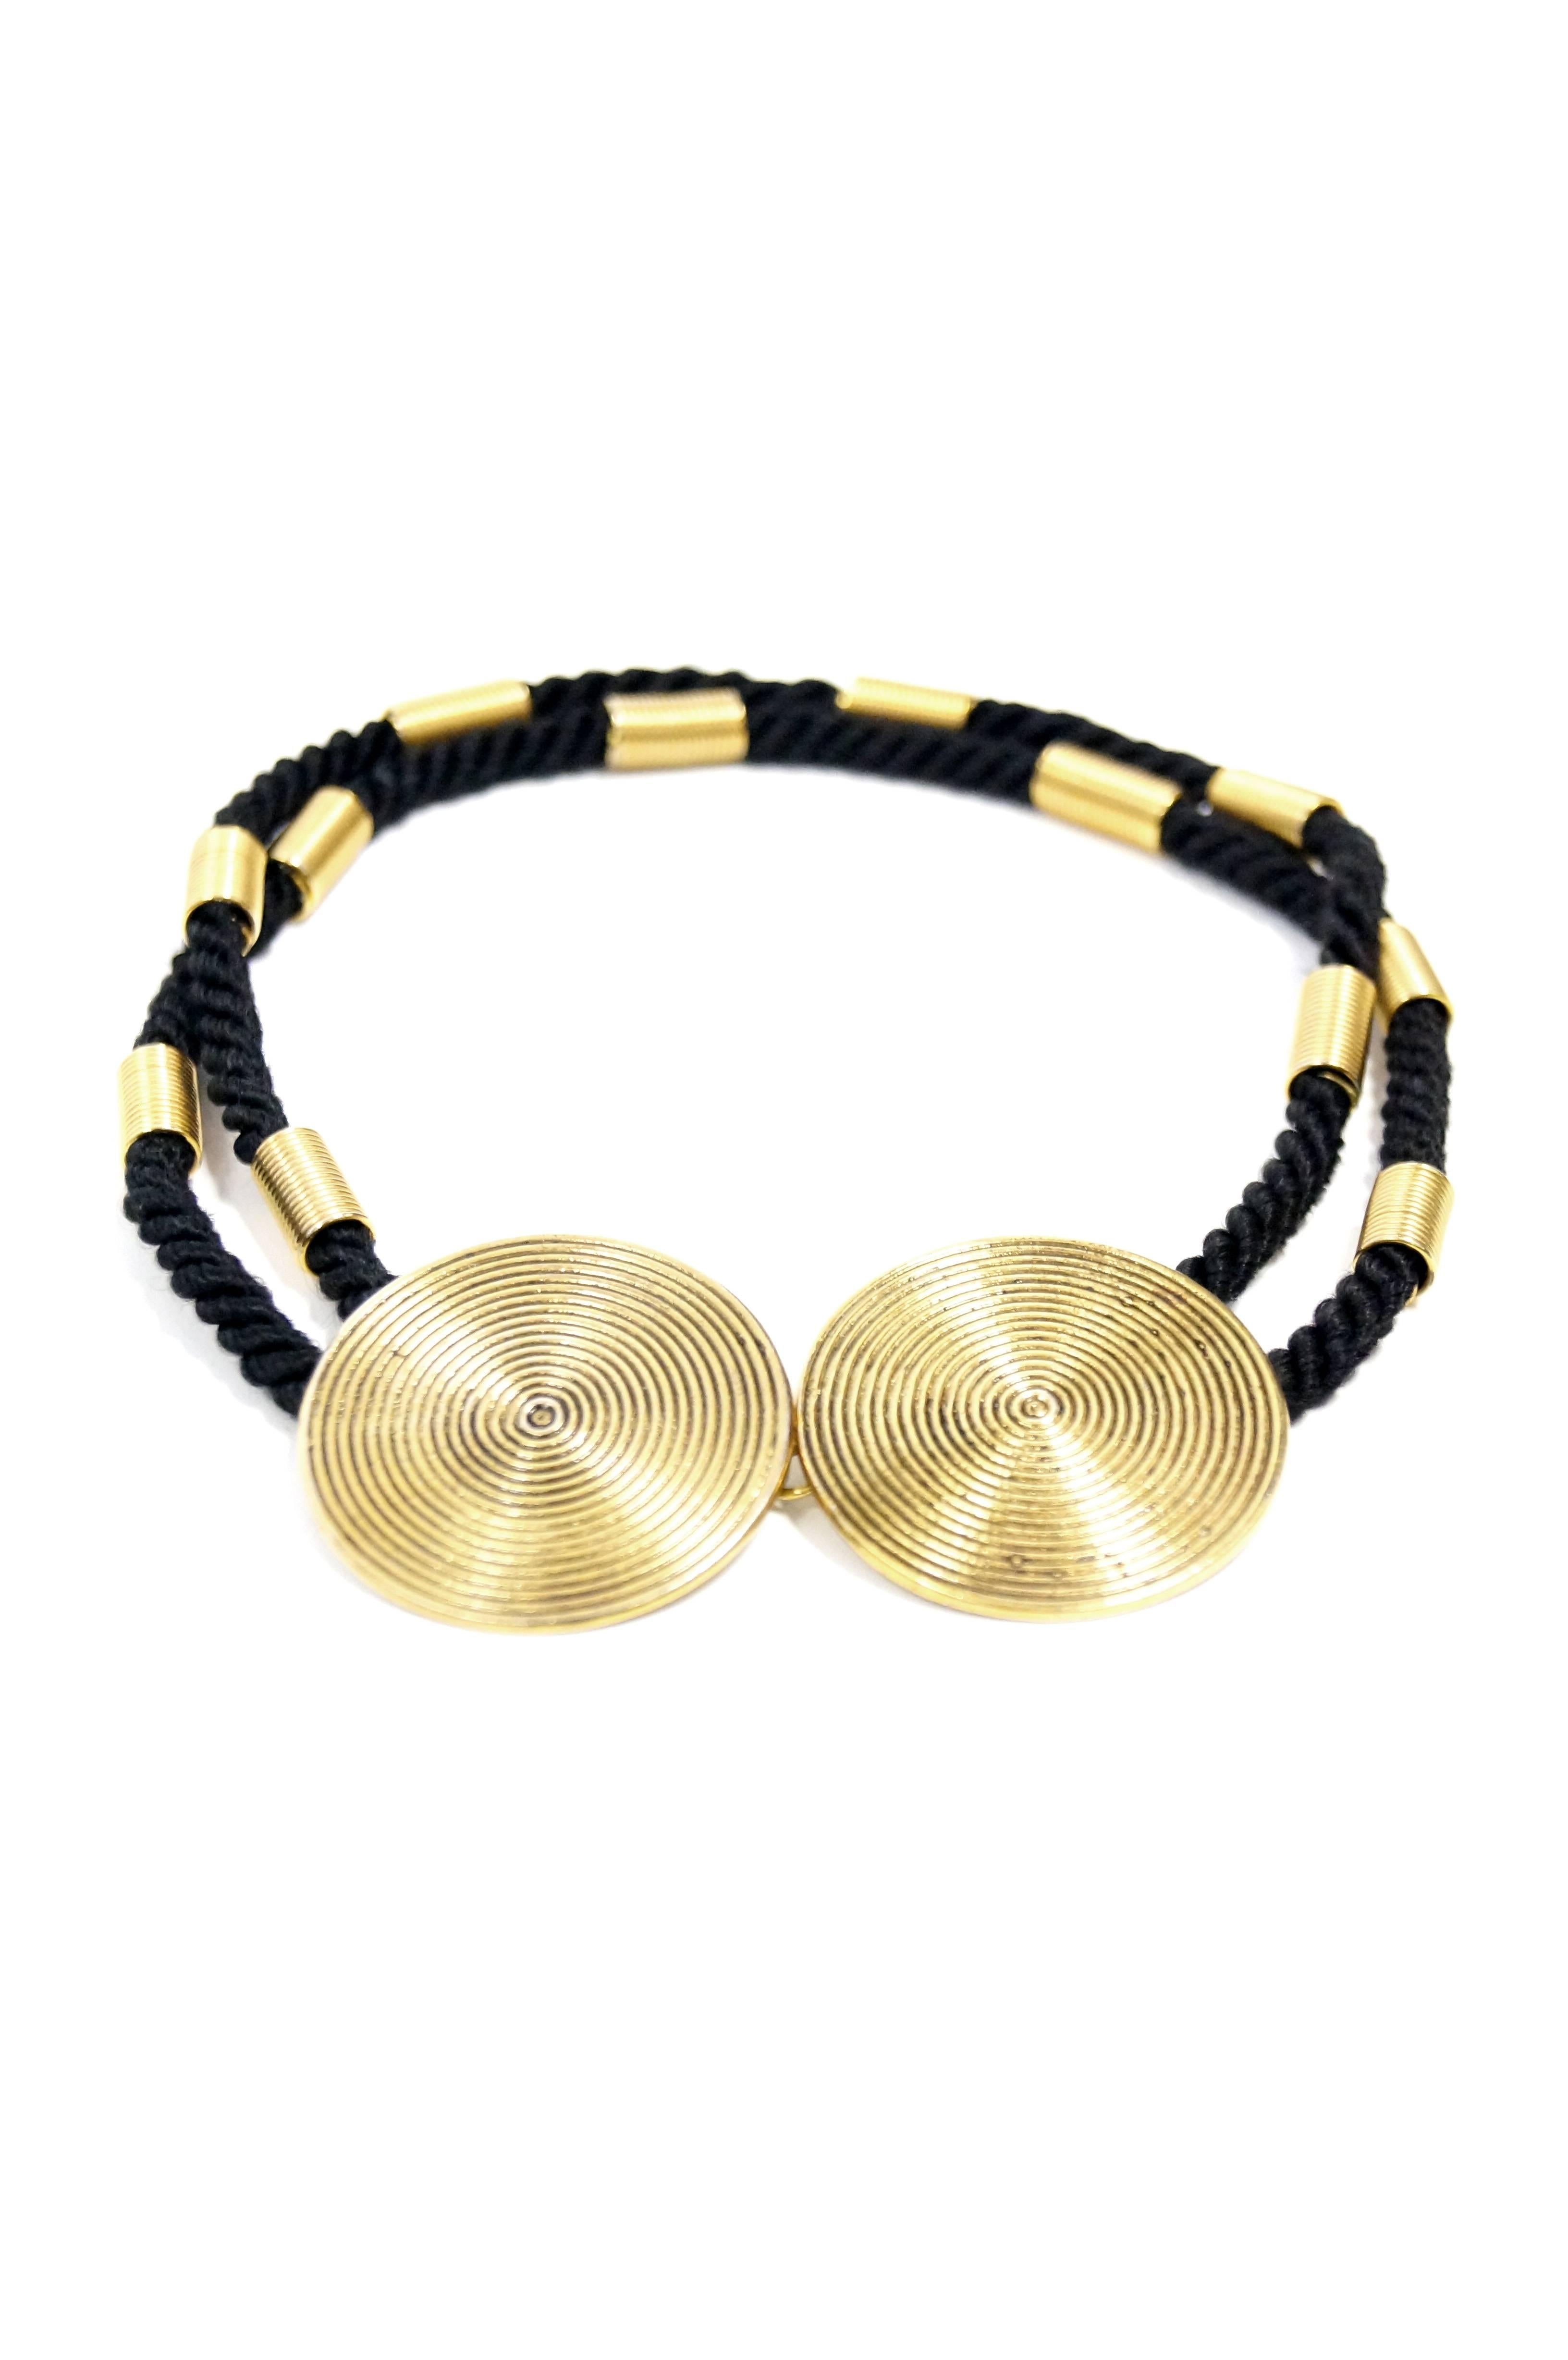 Wonderful modernist necklace by Yves Saint Laurent. This choker necklace is composed of twirl braided silk ropes, each decorated with six long spring - like tube beads. The necklace features two large disks marked with concentric circles. The discs